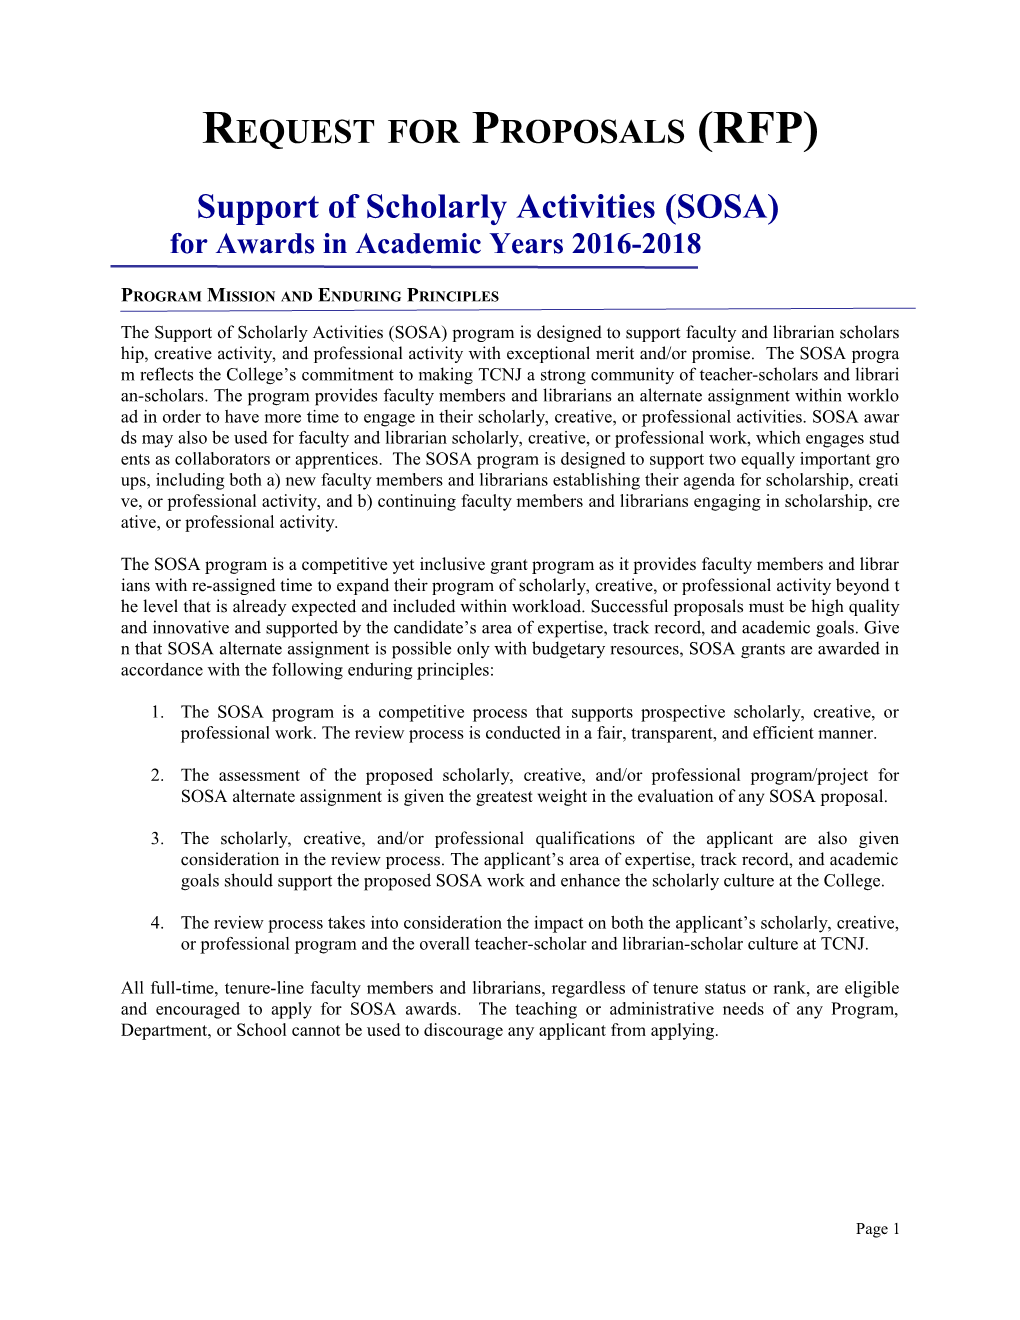 Support of Scholarly Activities (SOSA)